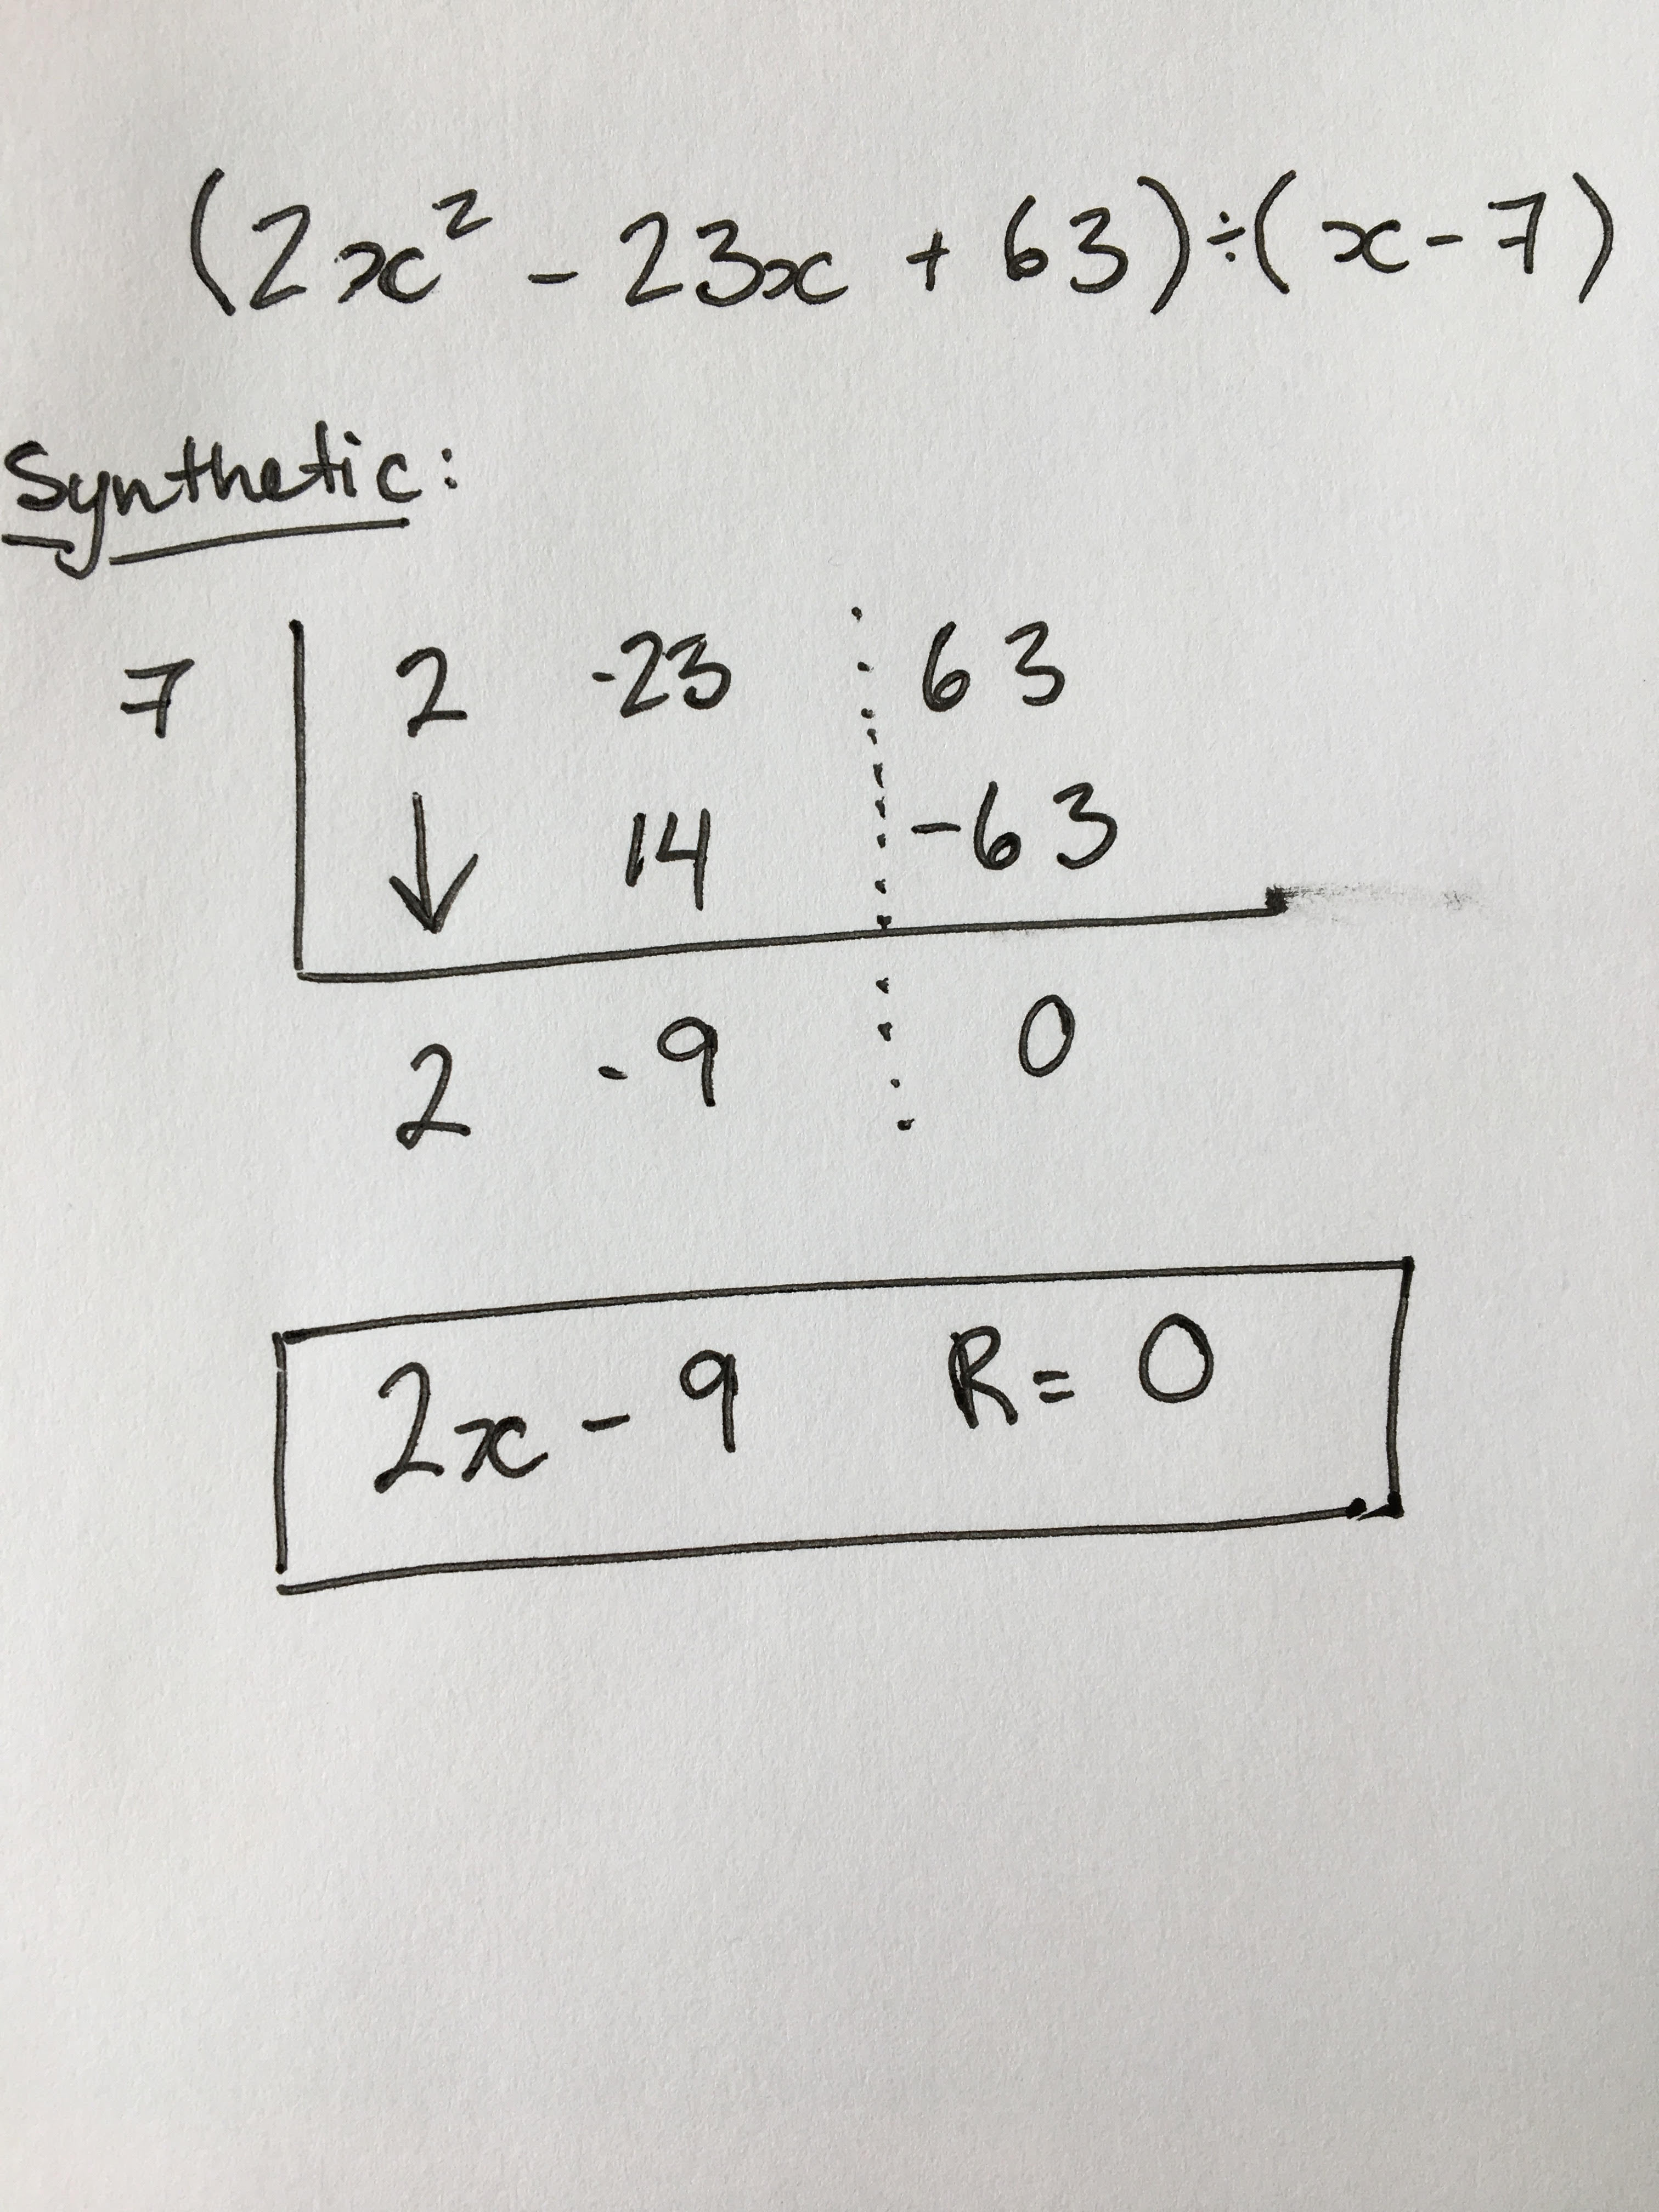 How Do You Use Synthetic Division To Divide 2x 2 23x 63 X 7 Socratic